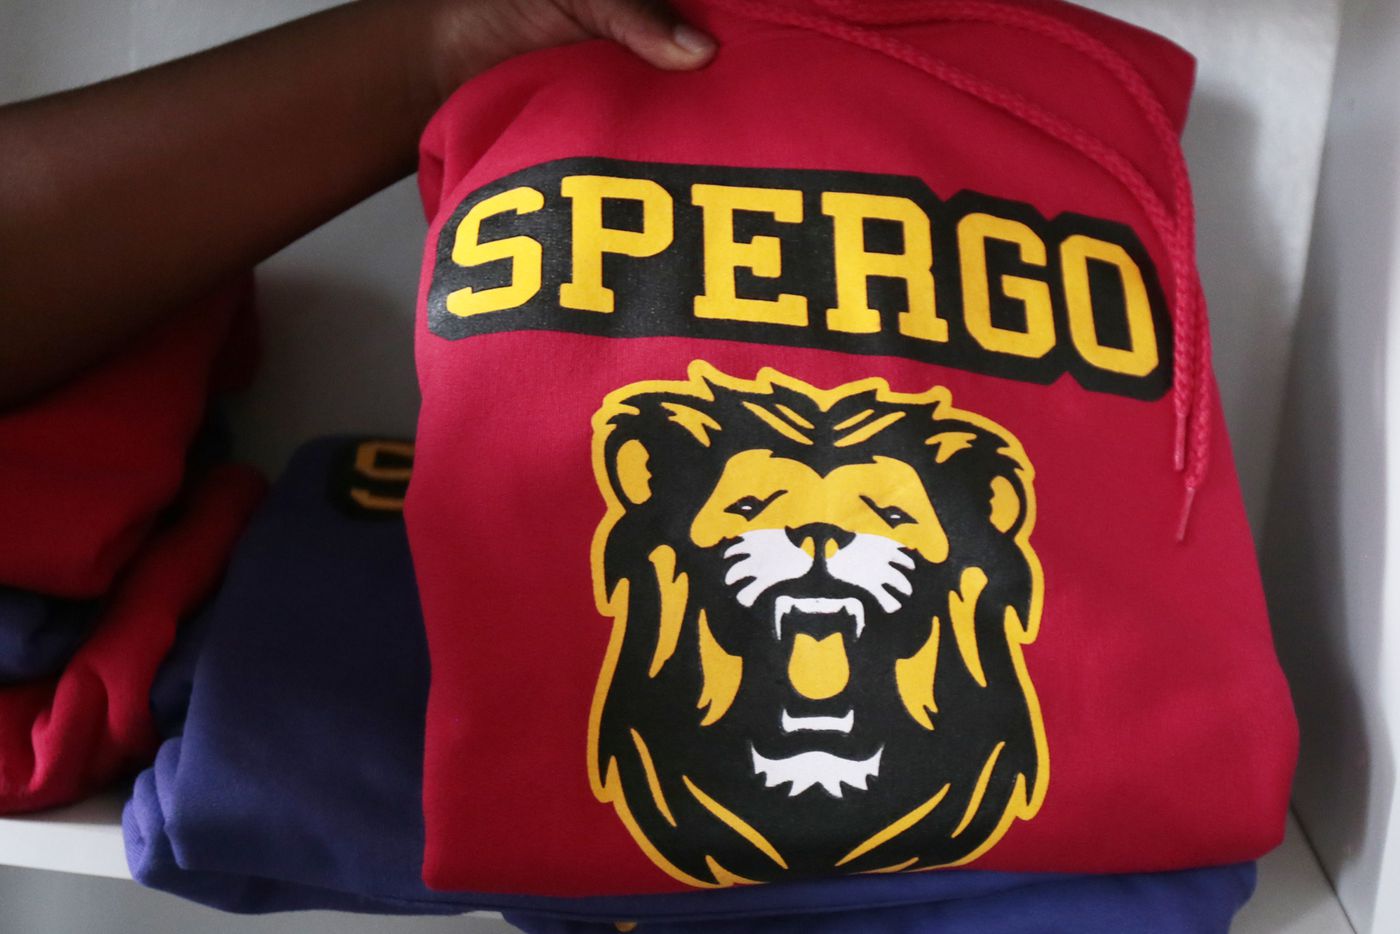 Spergo hooded sweatshirts from the line of 13-year-old entrepreneur Trey Brown.